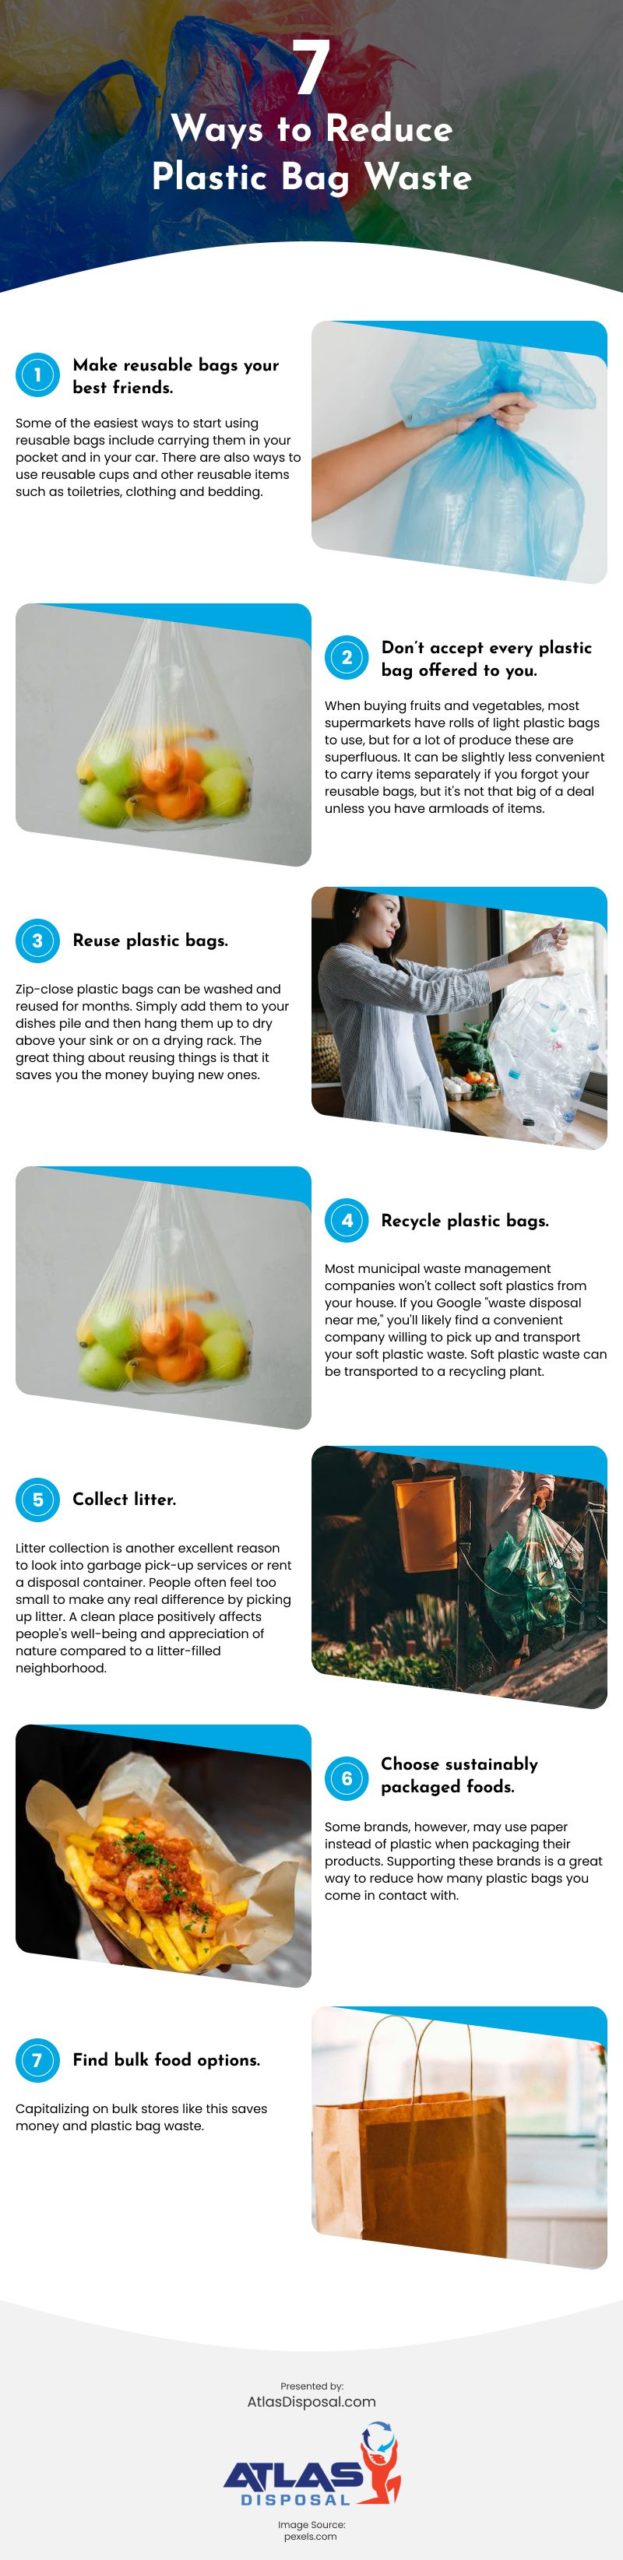 7 Ways to Reduce Plastic Bag Waste Infographic